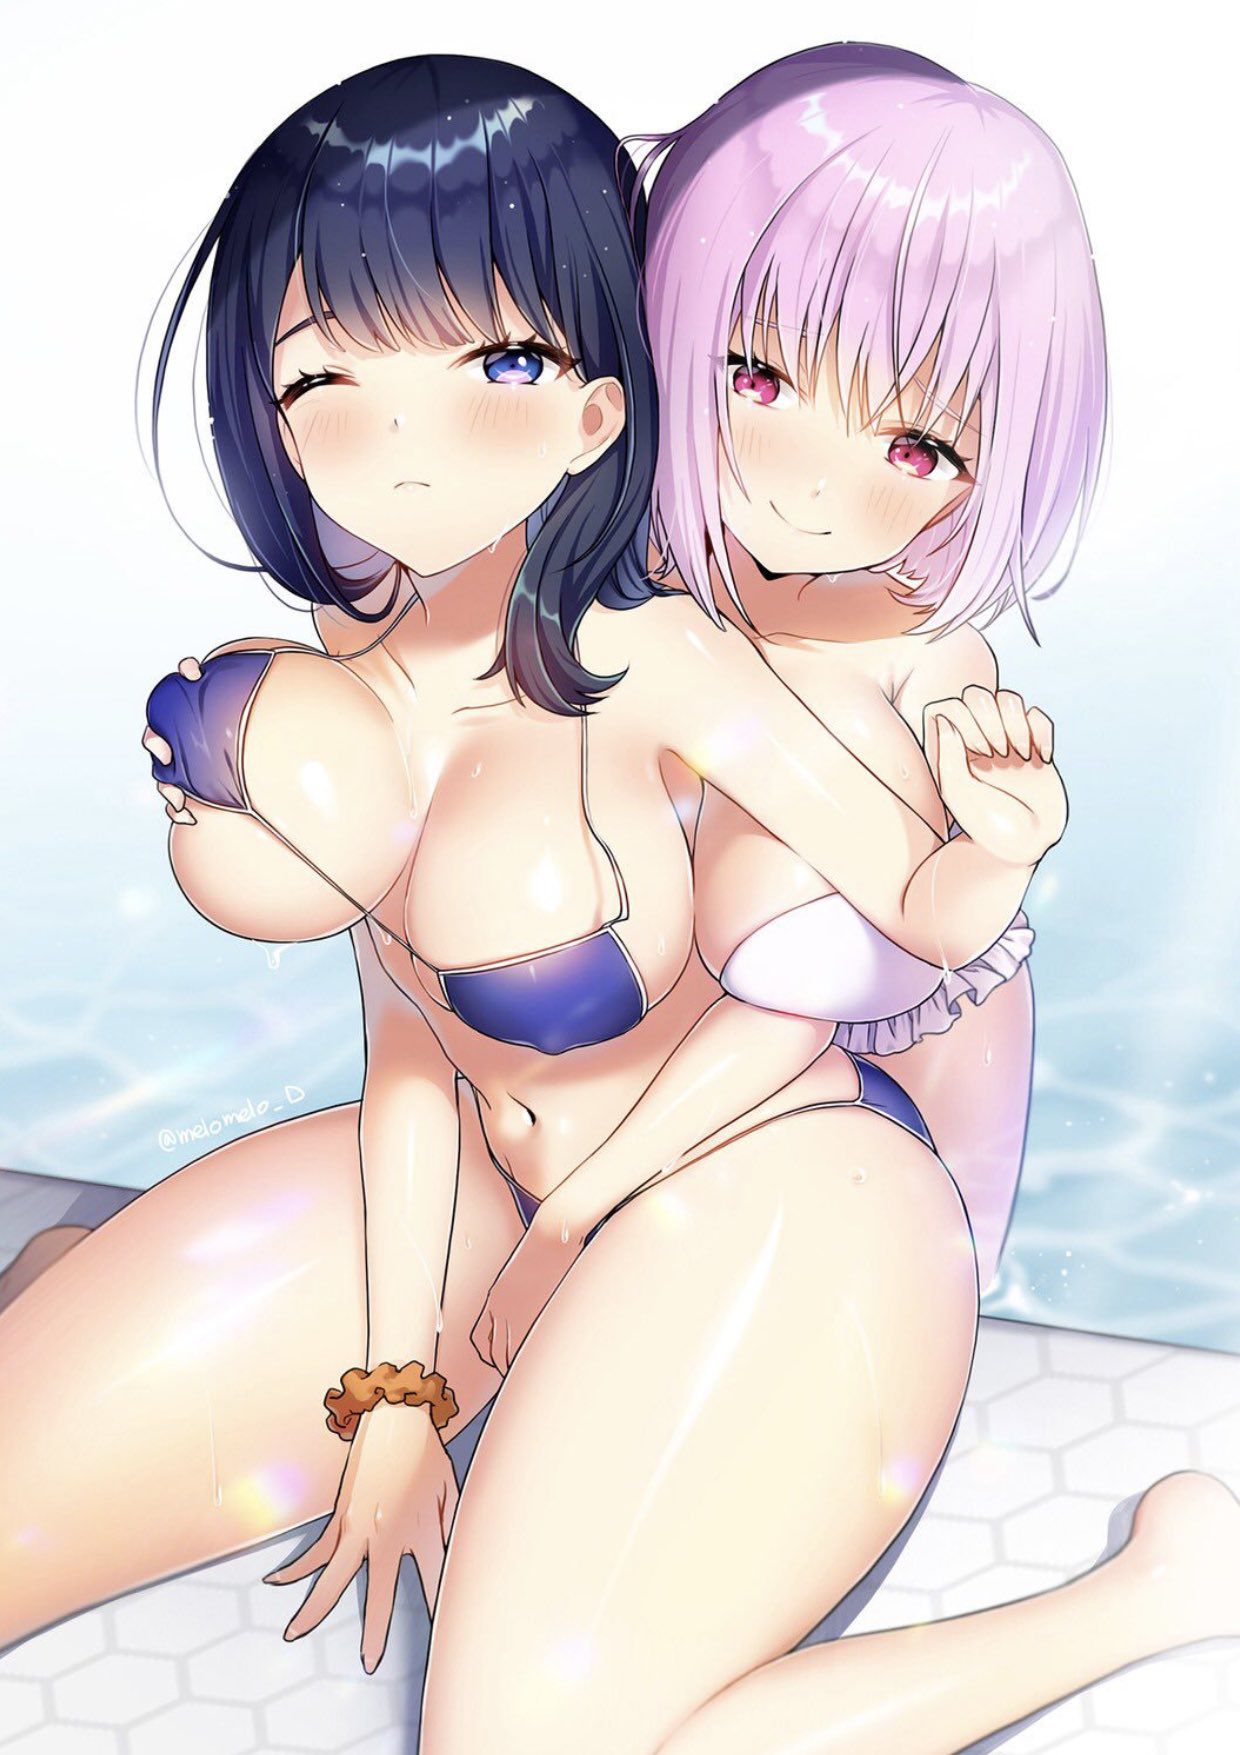 I envy you. Mix me too! Yuri two-dimensional erotic image between girls who are relentless in Lezplay 24